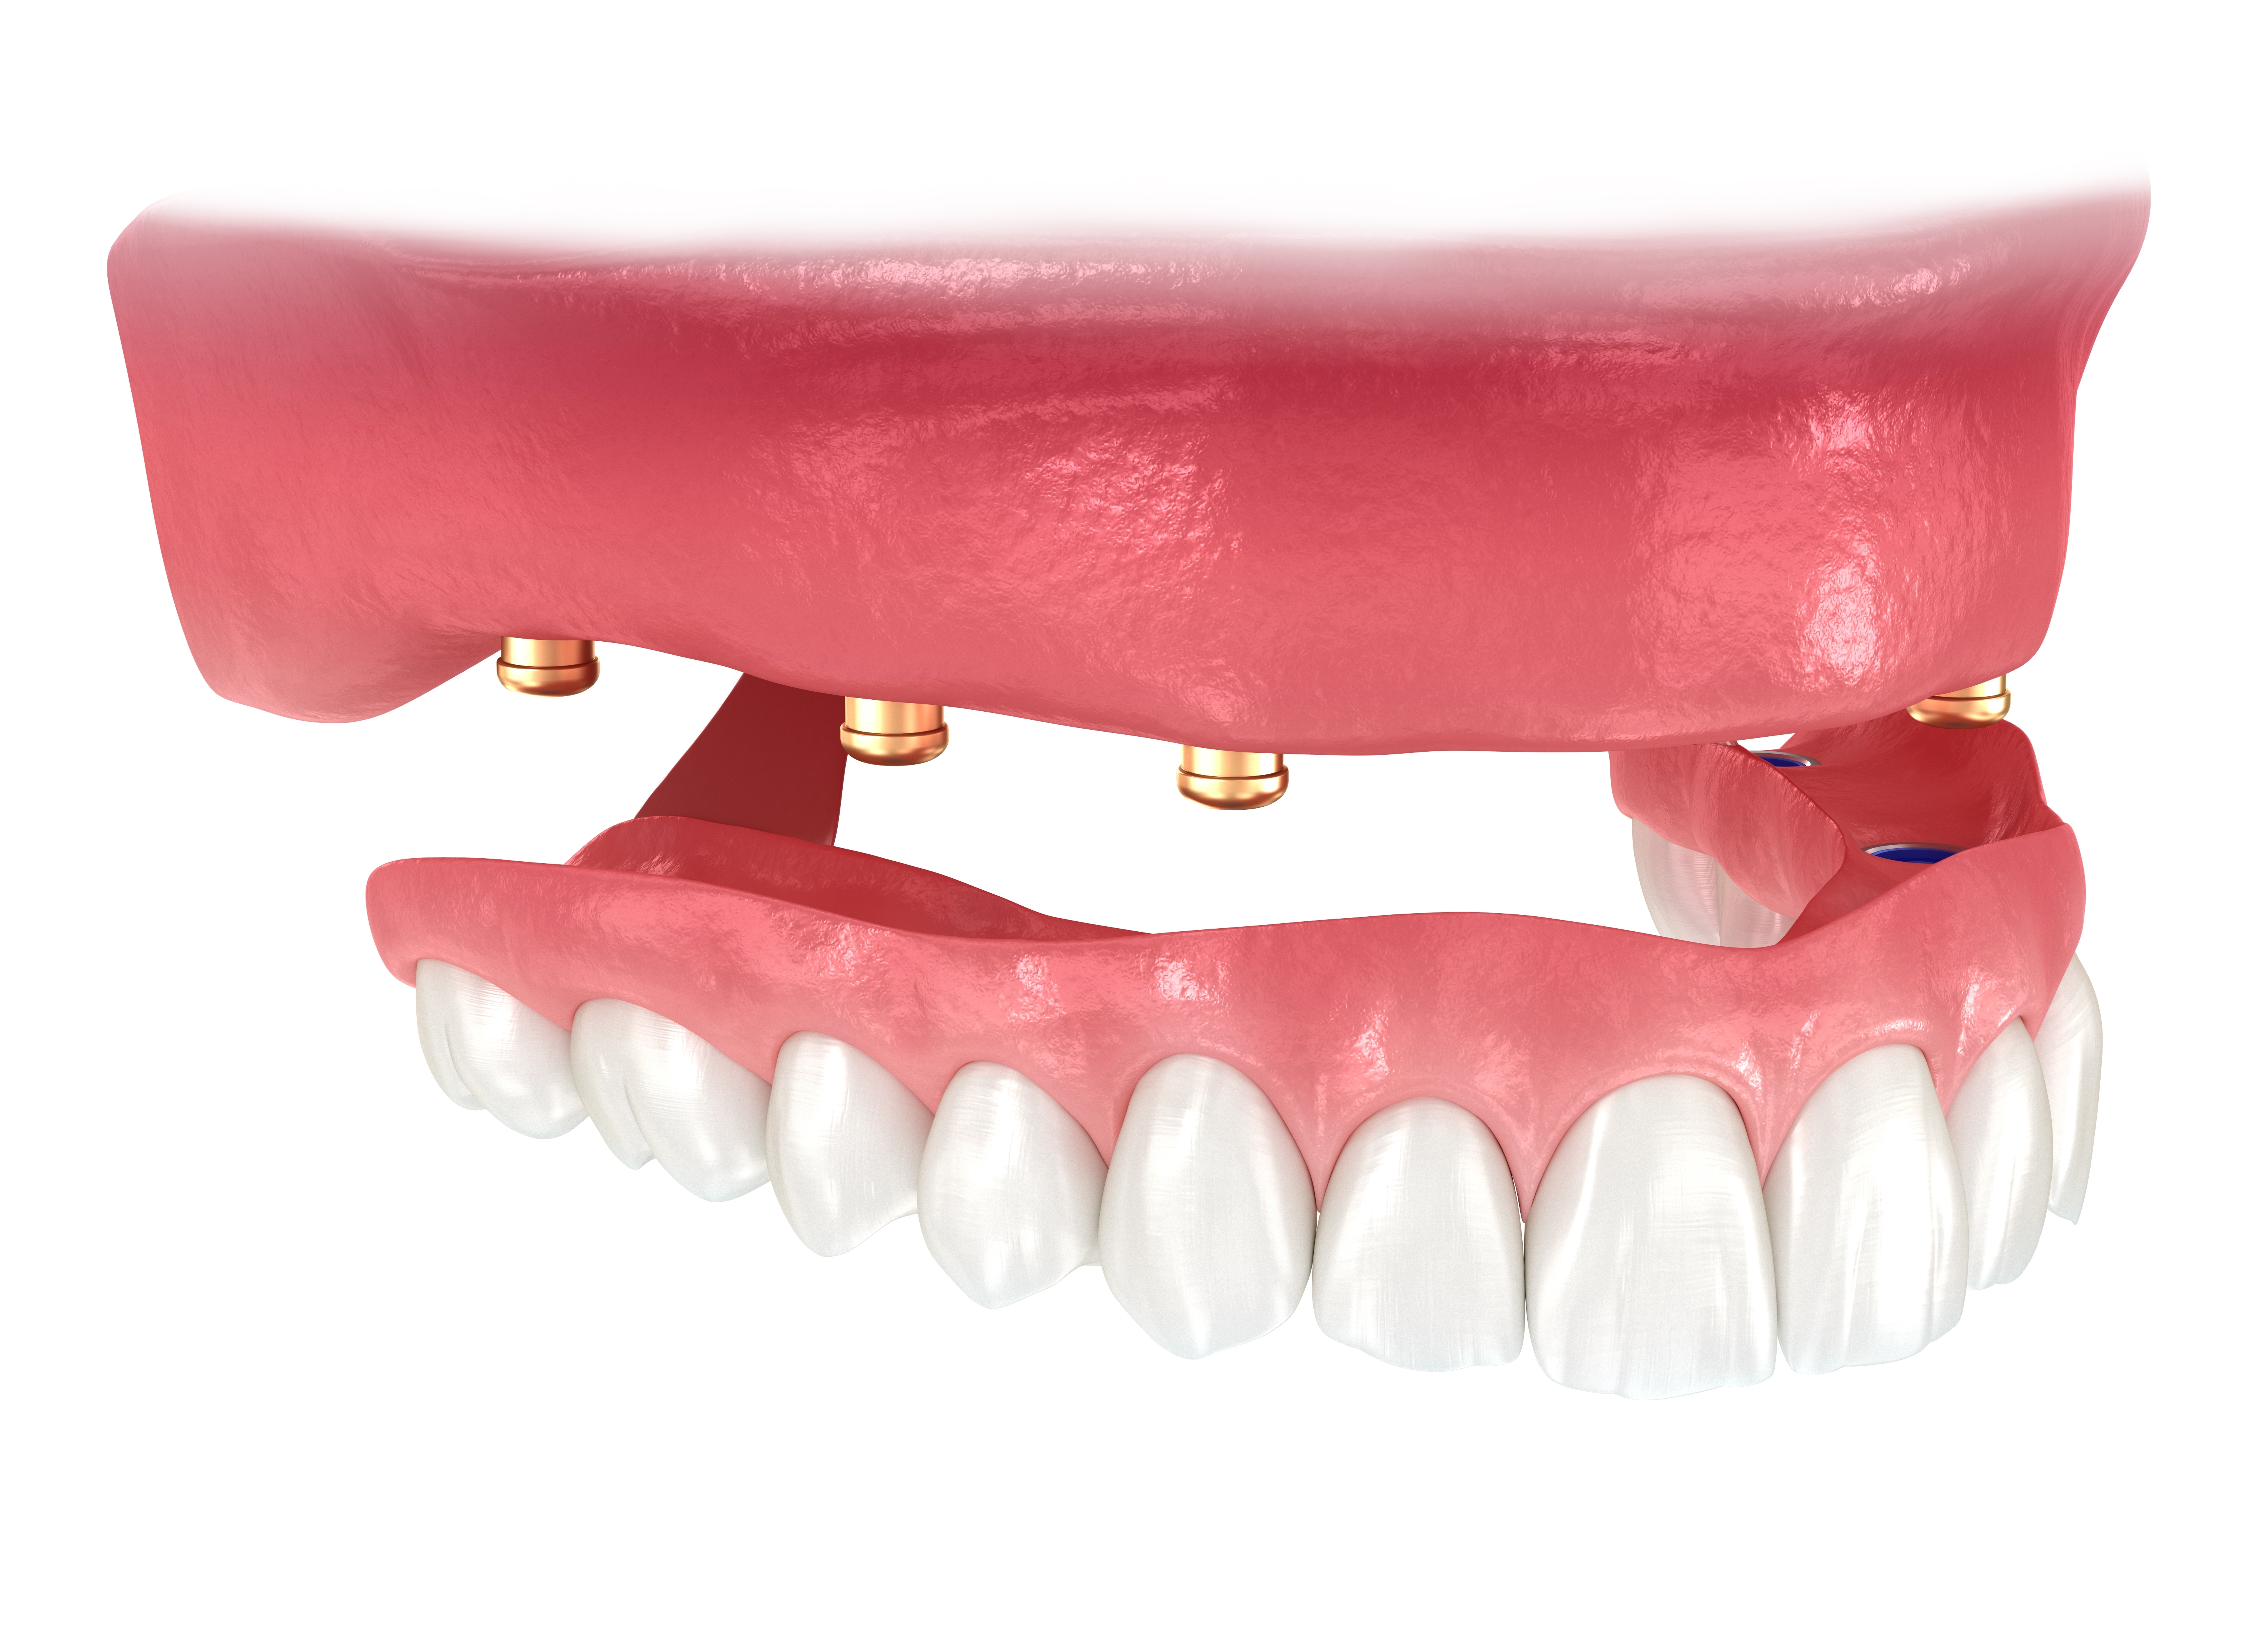 Implant Supported Dentures Can Solve The Problem Of Missing Teeth